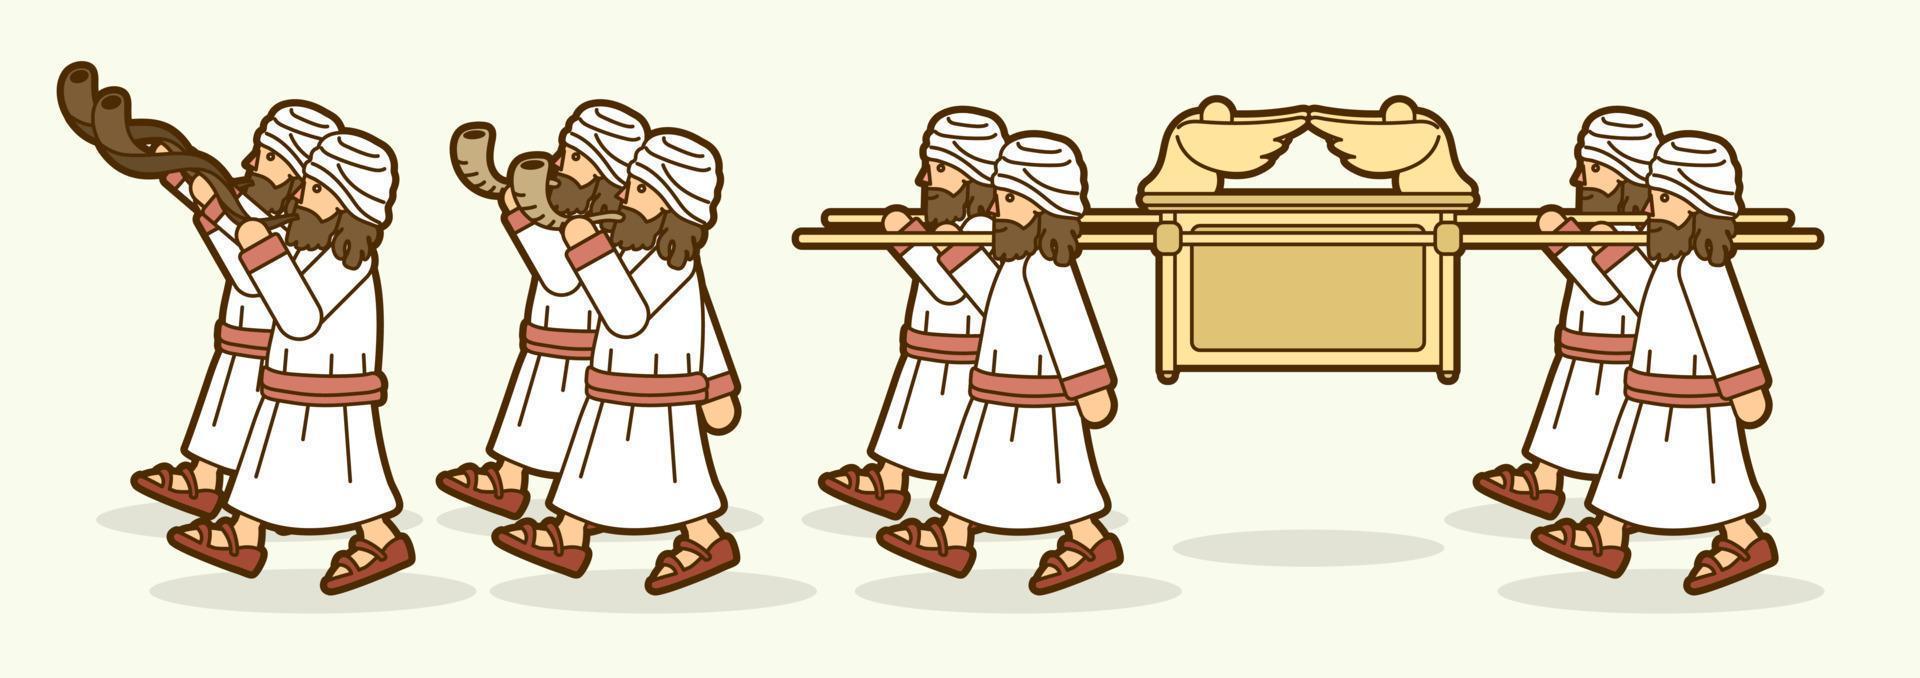 Group of Levi Carrying Ark of the Covenant and Blowing the Shofar Cartoon Graphic Vector